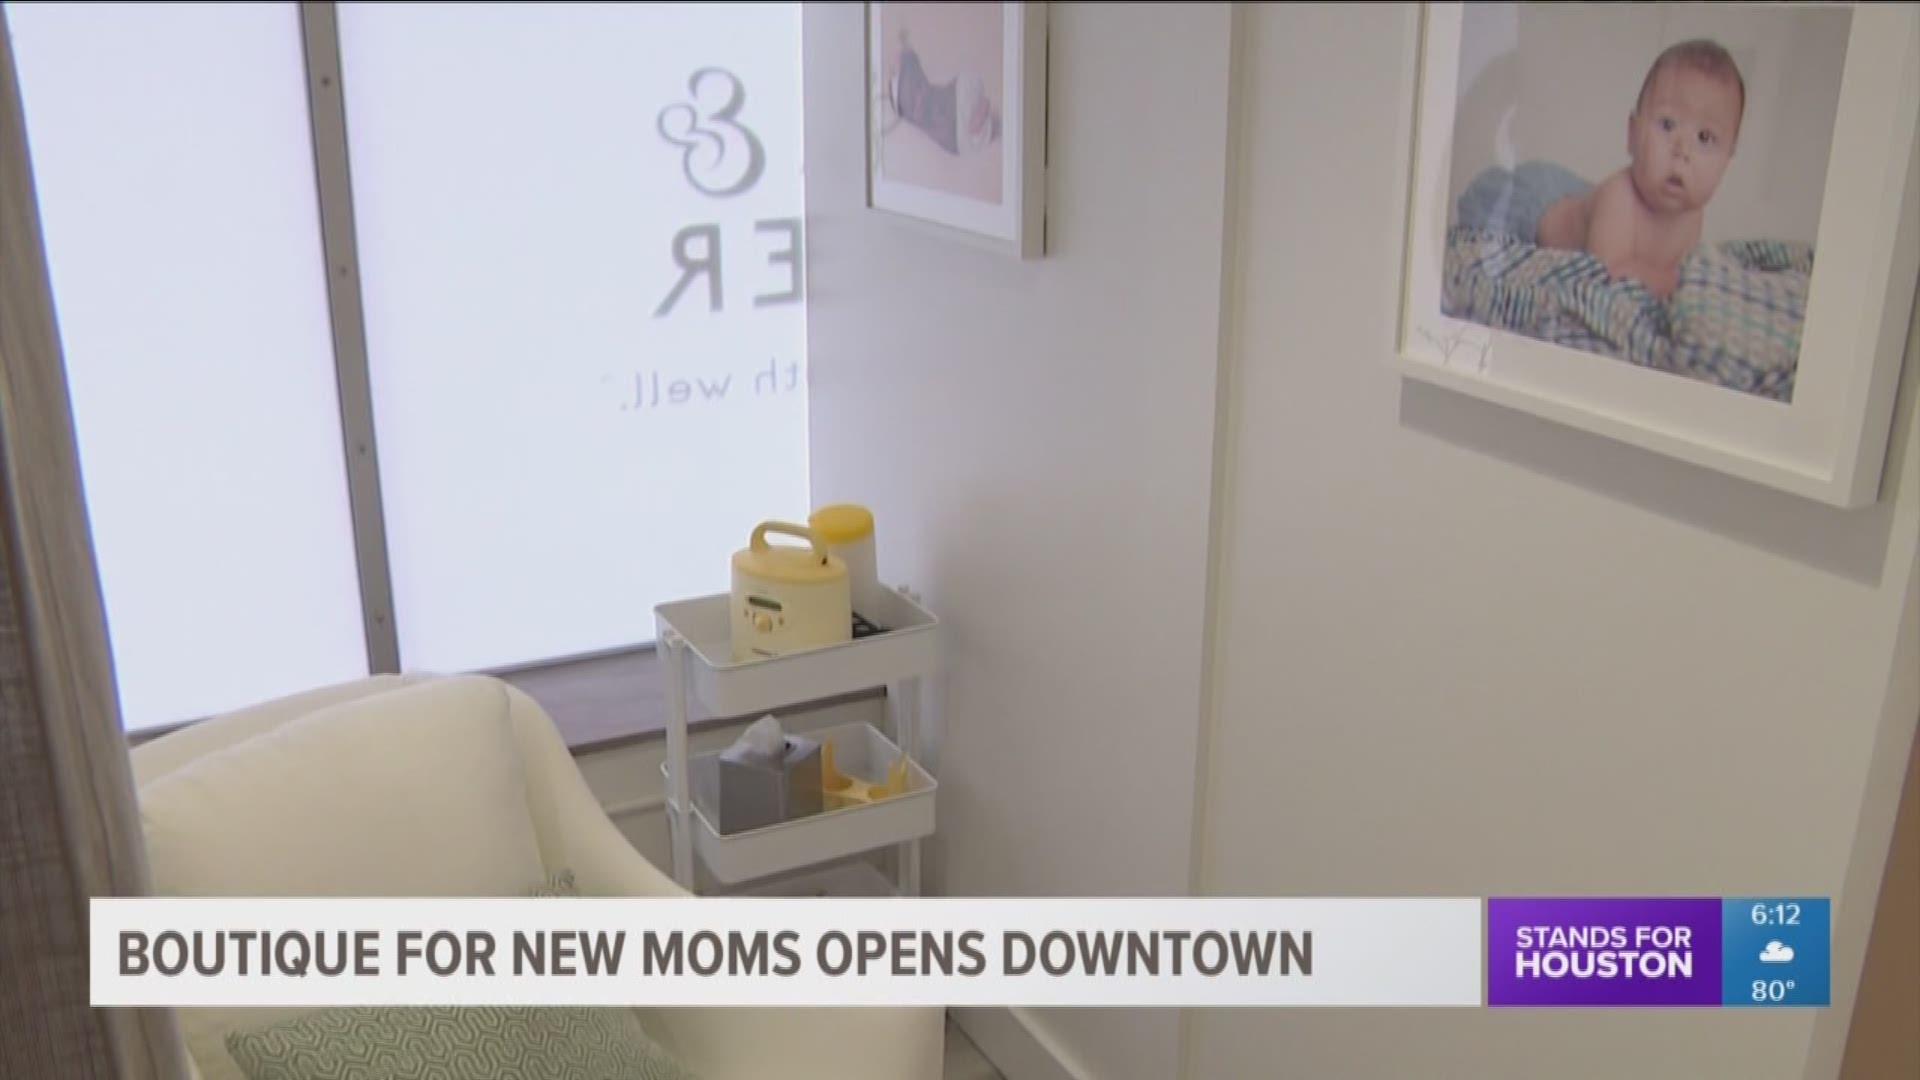 Work & Mother recently opened in downtown Houston. The boutique business aims to provide a private place for breastfeeding mothers to pump during the workday.